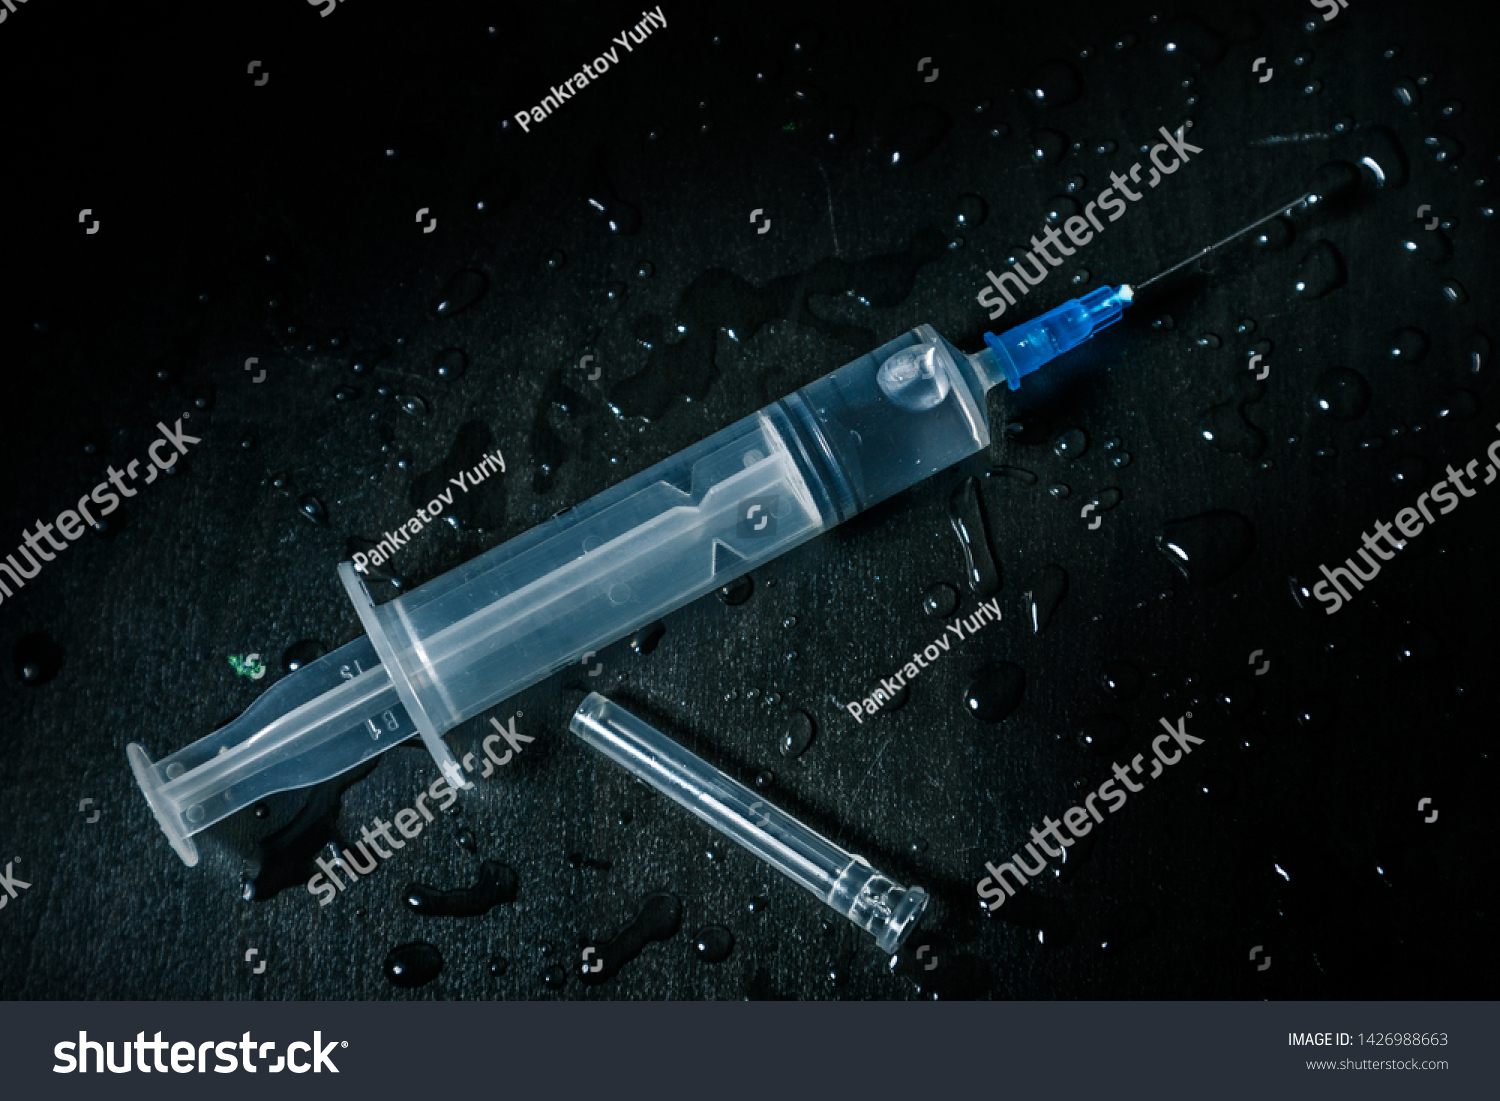 A syringe with a clear liquid lies on a dirty dark background covered with drops. #1426988663